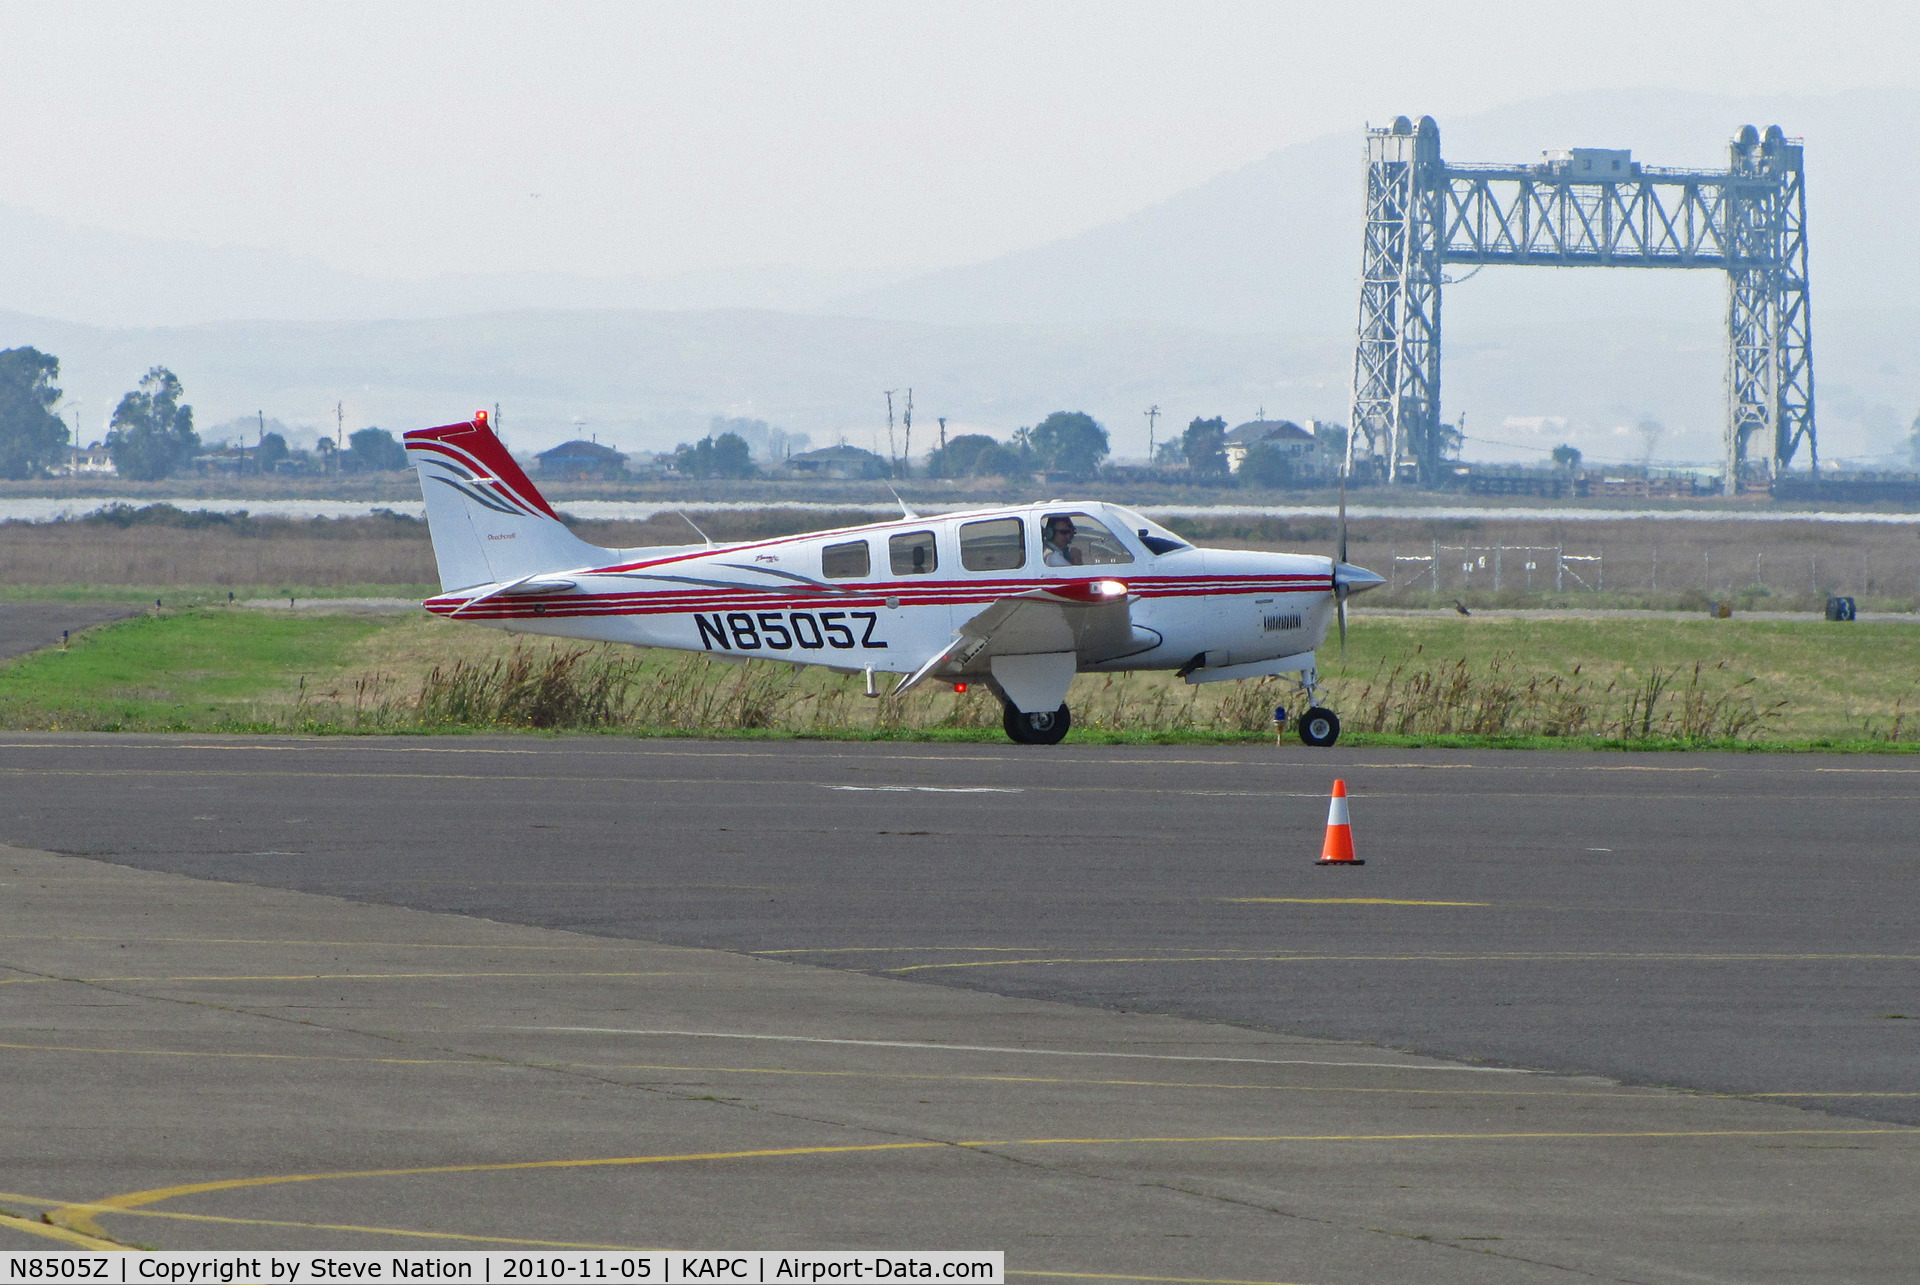 N8505Z, Raytheon Aircraft Company A36 Bonanza C/N E3634, ex-Japan Air Lines A36 Bonanza after maintenance flight - Napa River RR Bridge in background (JAL closed training program with IASCO in October 2010 after nearly 40 years)